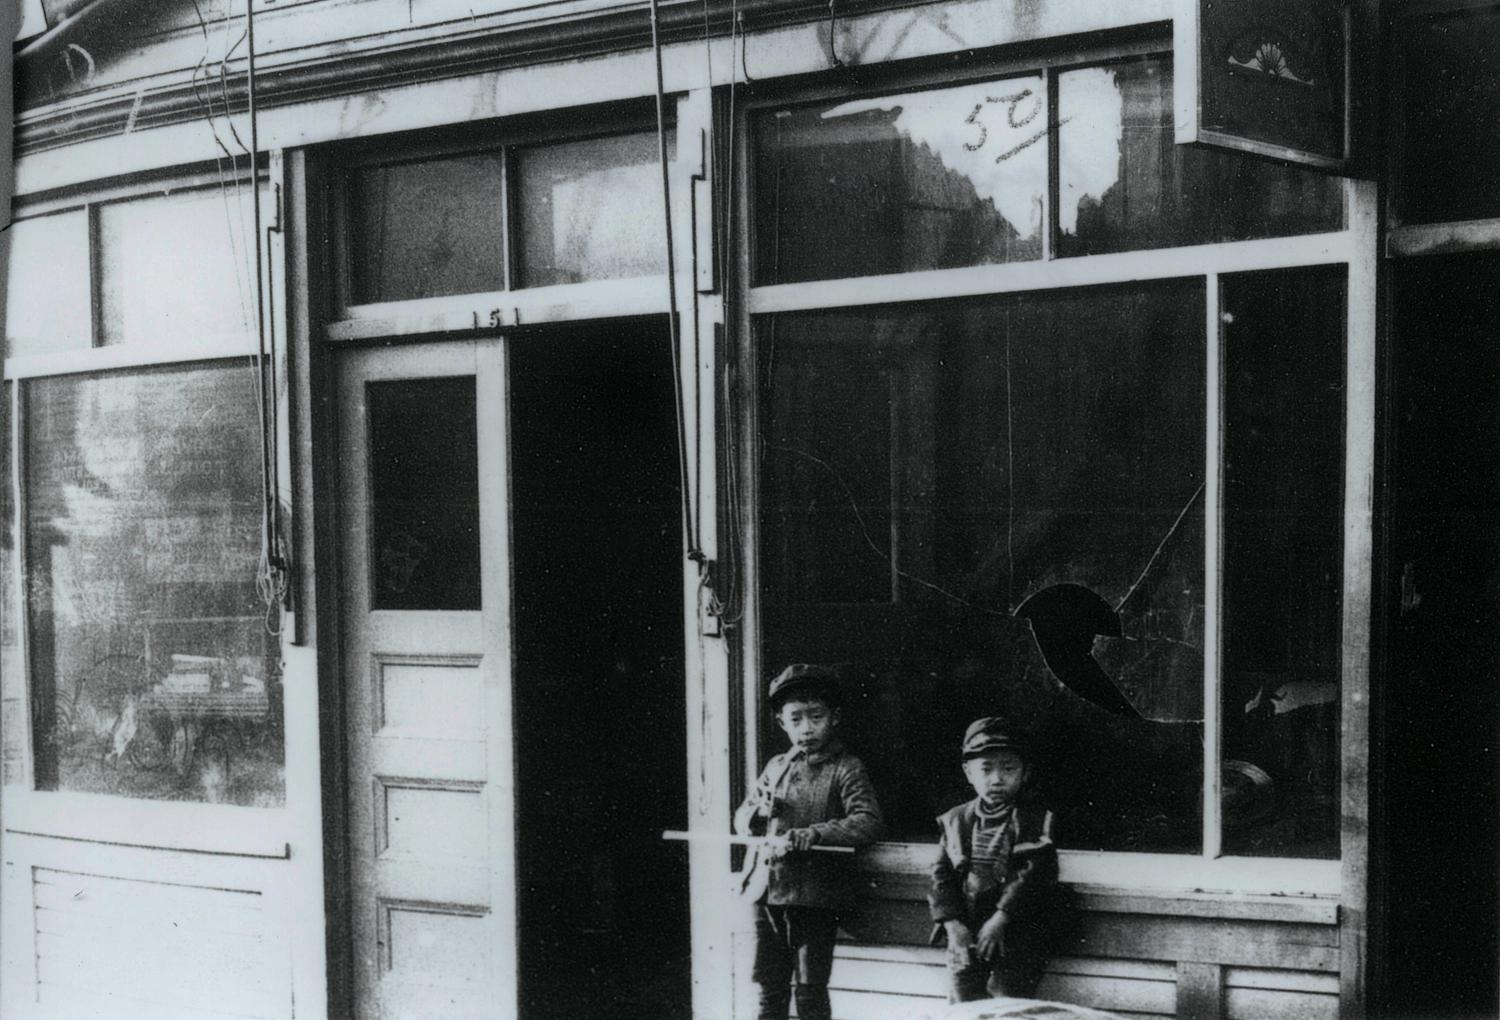 Photo of two young children outside a business that was damaged in 1907 anti-Asian riot.